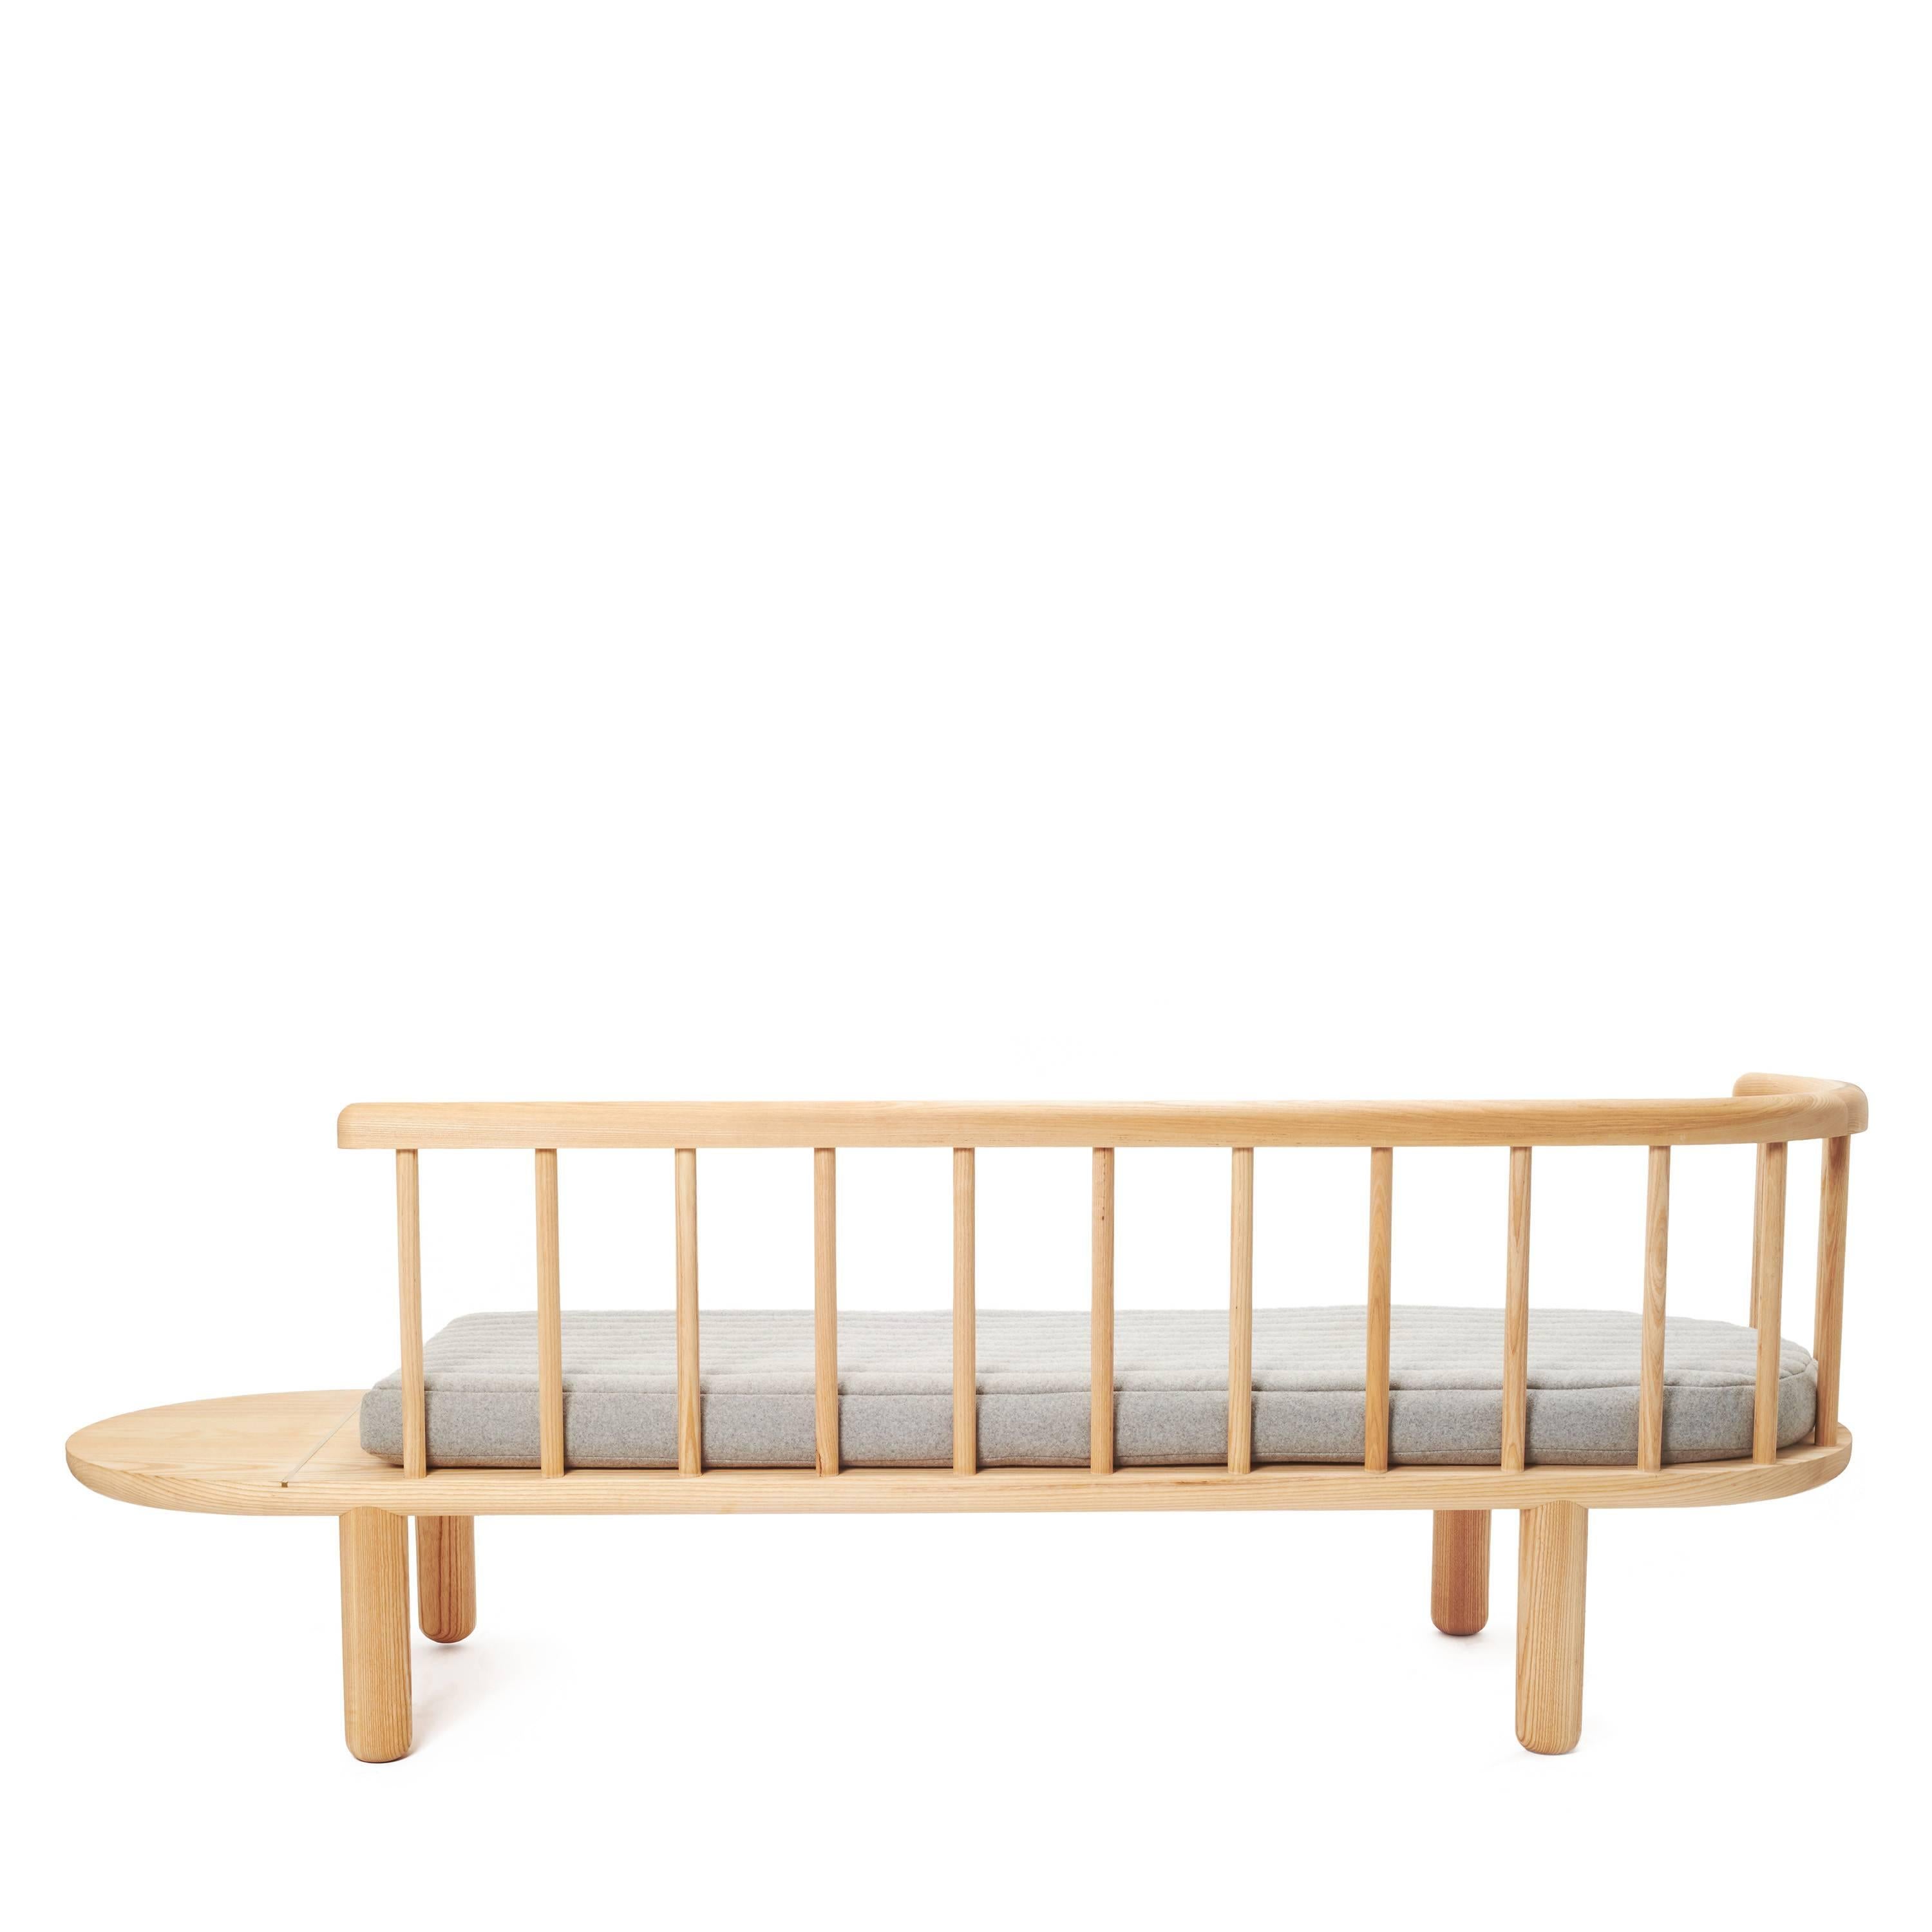 Keep your space fresh, Classic, and cool with this natural white oak spindle bench. Available with the gray cushion.